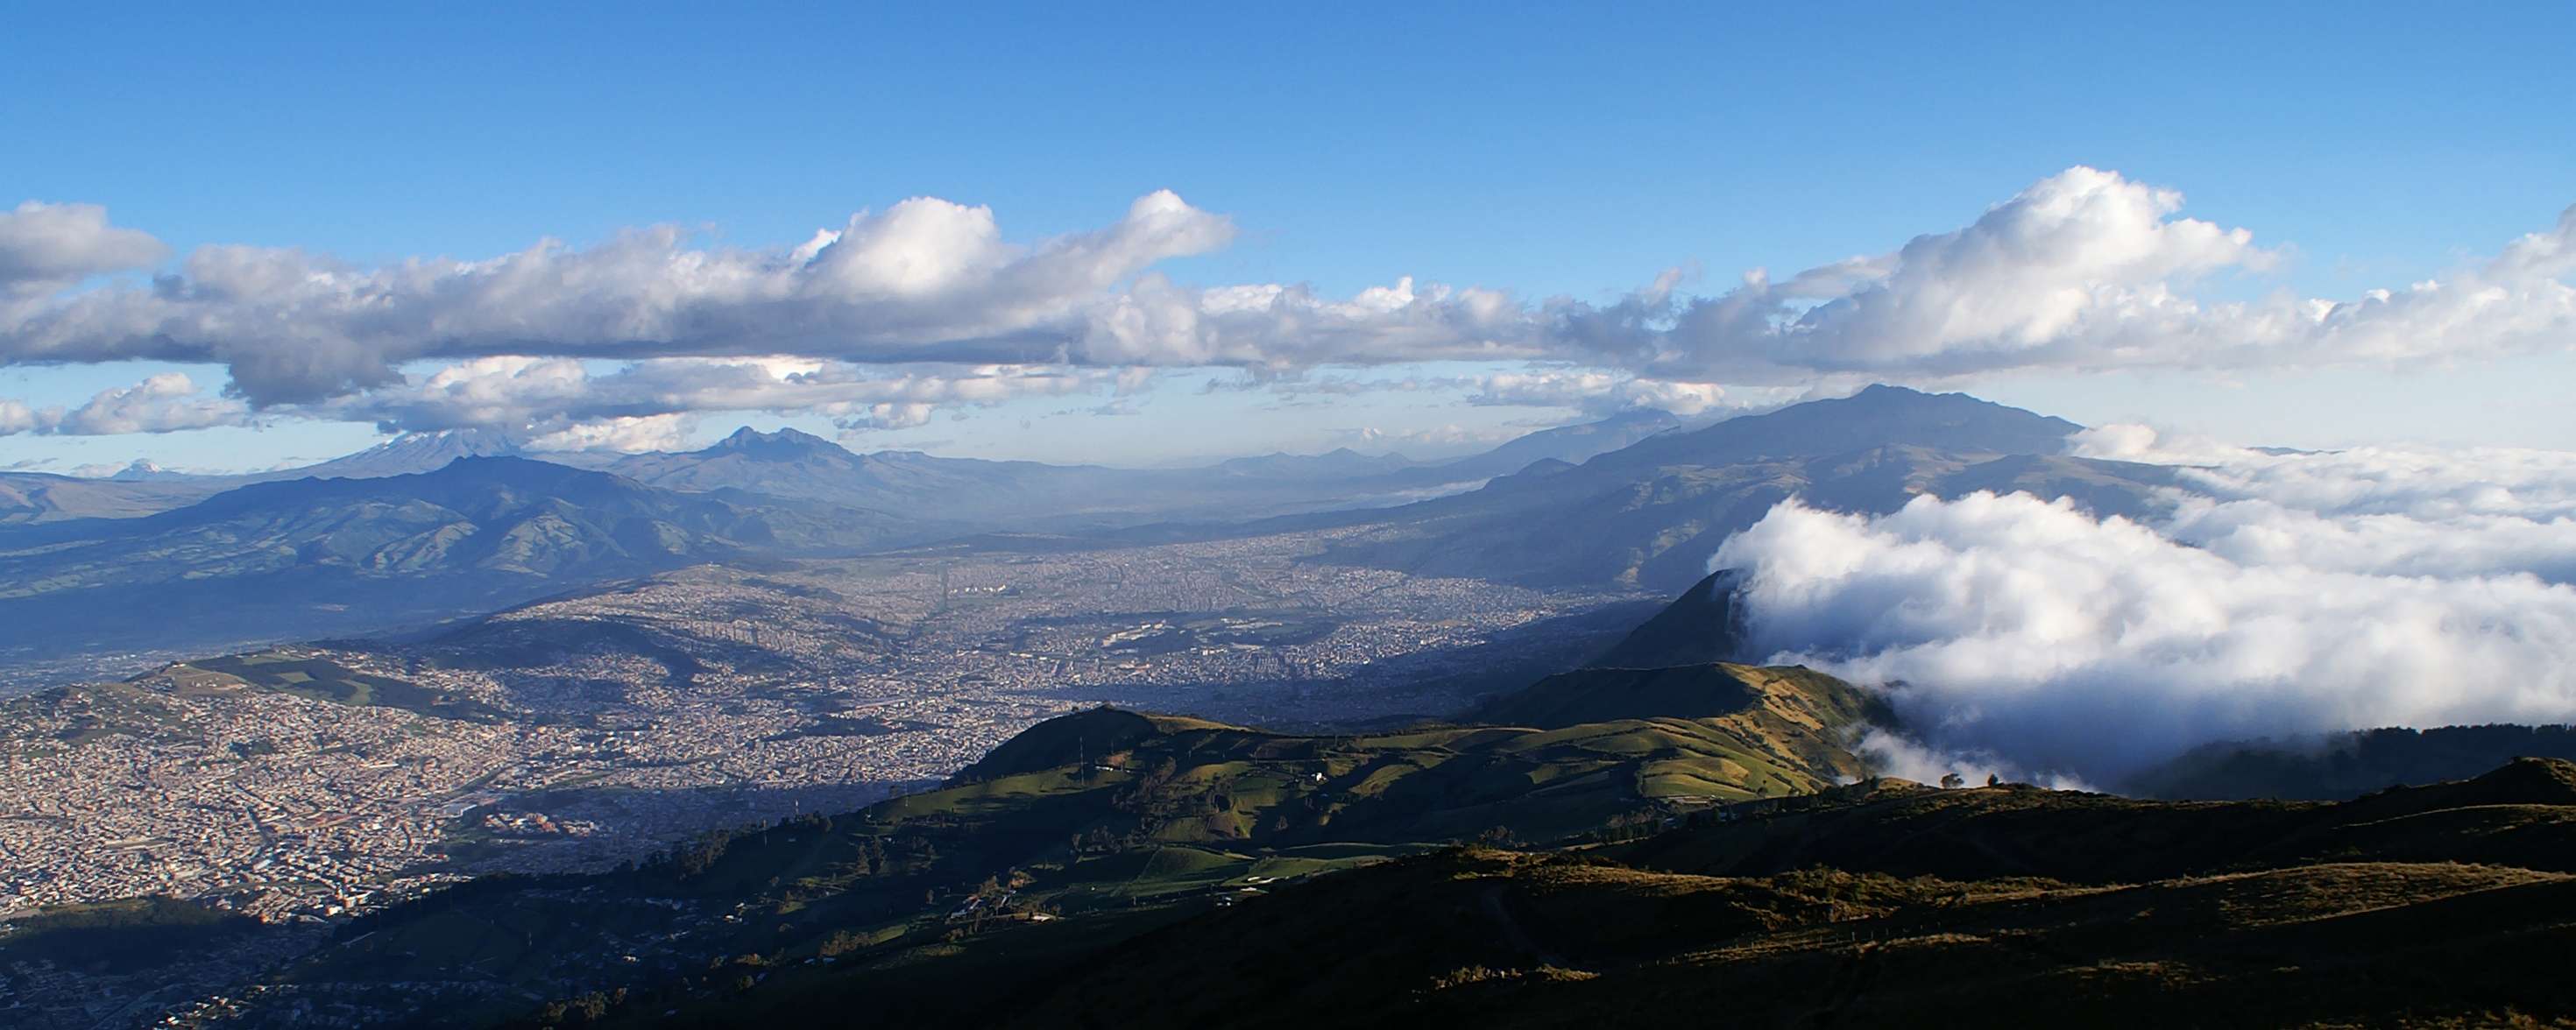 Quito with foehn clouds